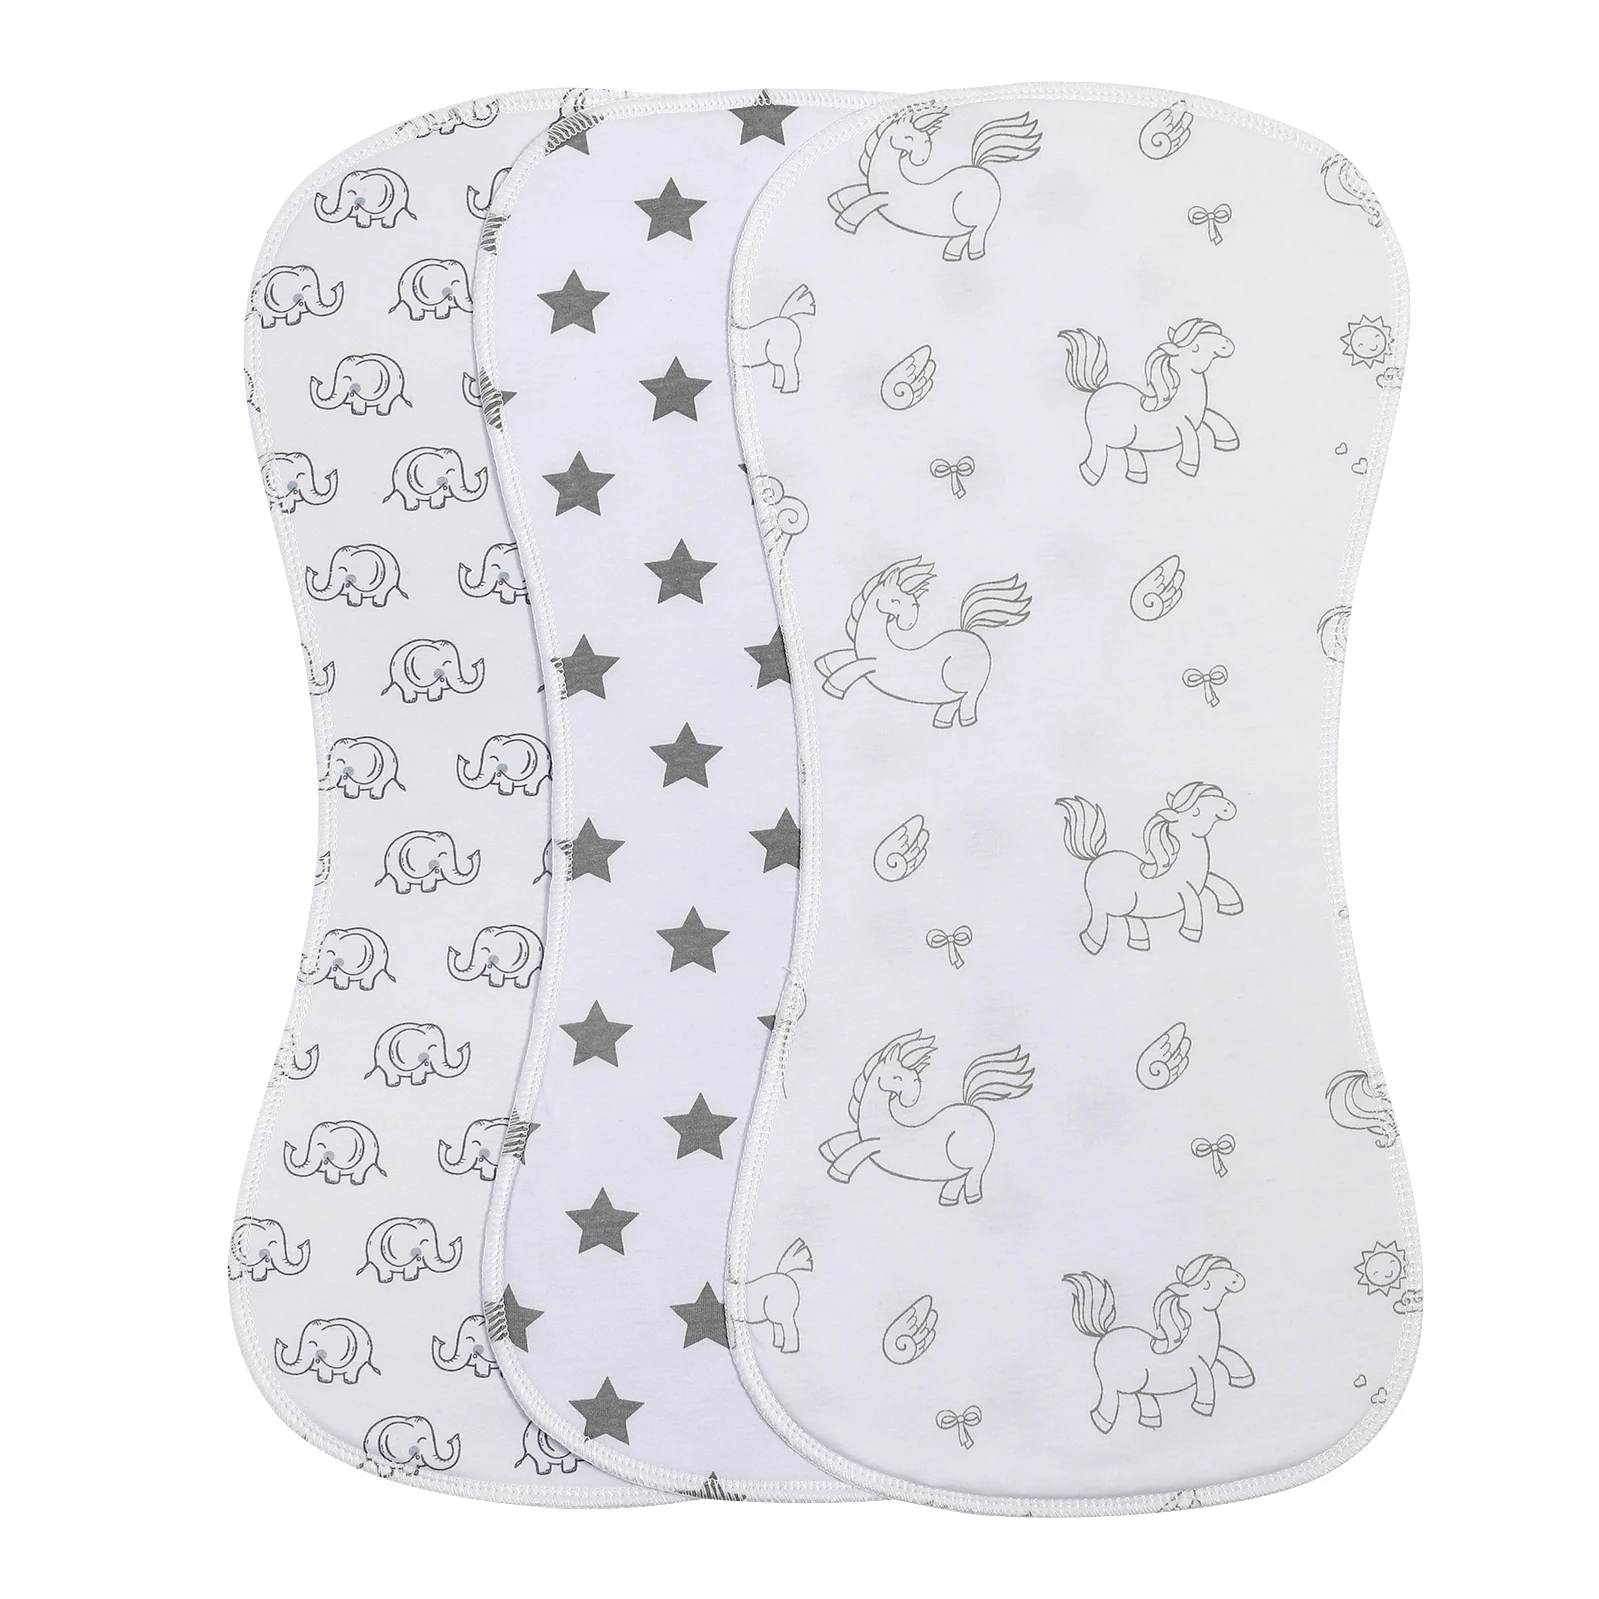 Baby Accessories discount Baby Burp Cloths Organic Cotton Absorbent Towel Fabric 3 Layer Baby Burp Set Ultra Absorbent Burping Cloth Unisex Fashion Bibs custom baby accessories